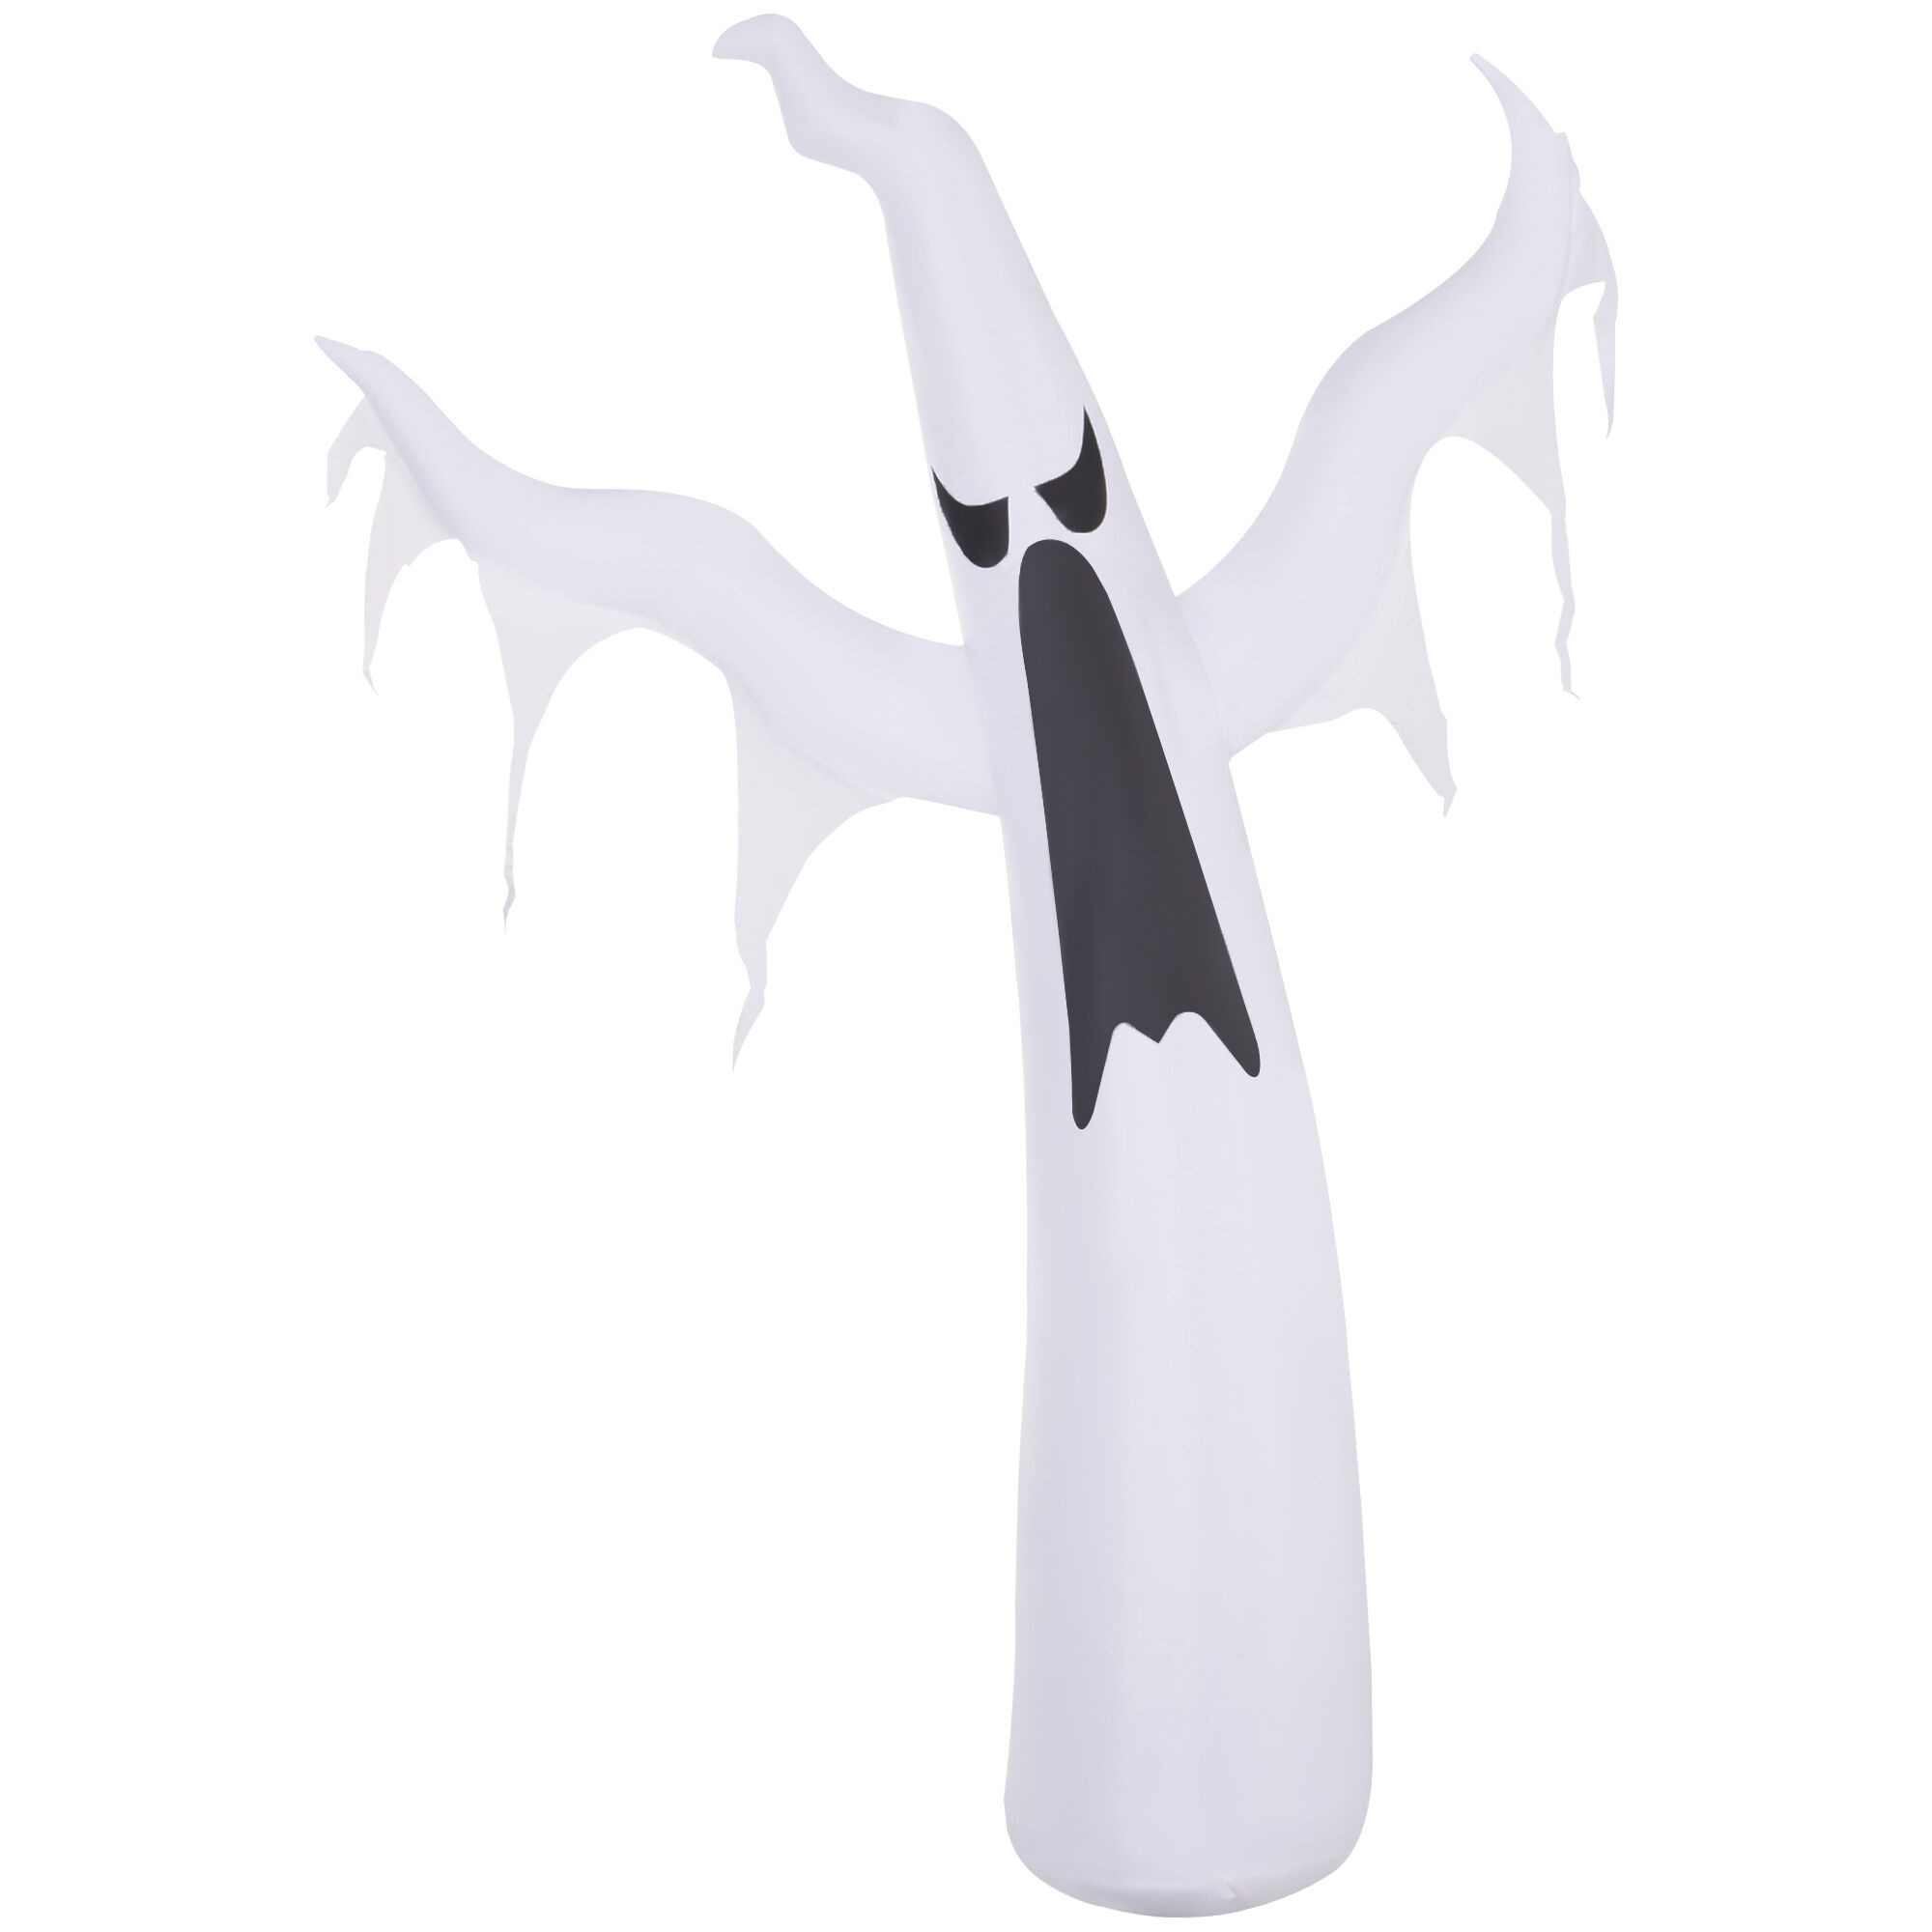 HOMCOM 6FT 1.8m LED Halloween Inflatable Decoration Floating Ghost Scary Party Outdoors Yard Lawn